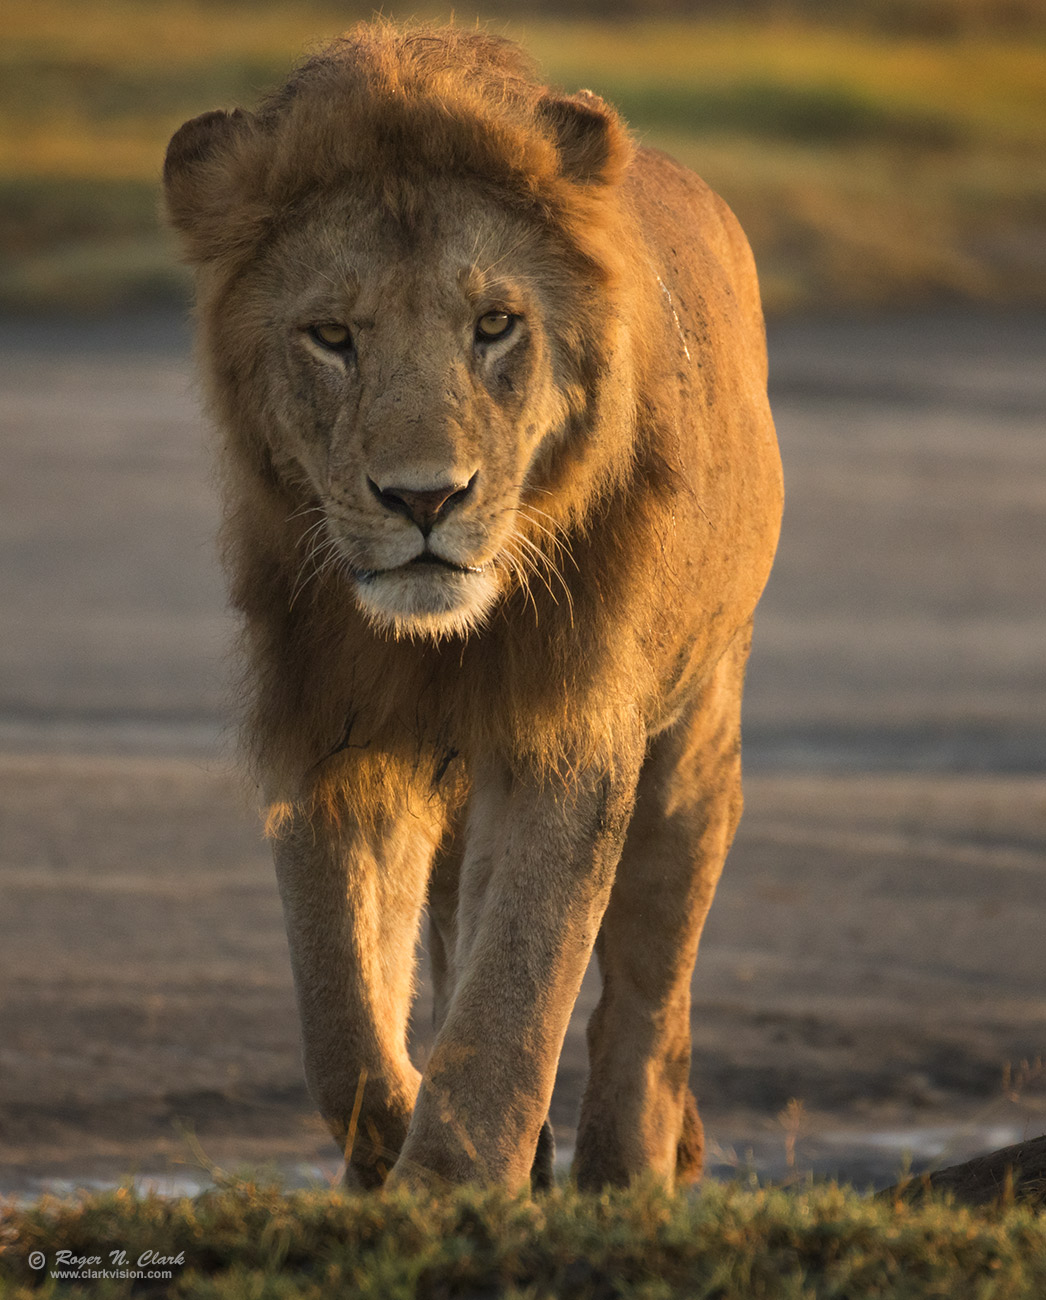 image male-lion-approaching-c02-16-2024-0U3A0590.b-1300s.jpg is Copyrighted by Roger N. Clark, www.clarkvision.com